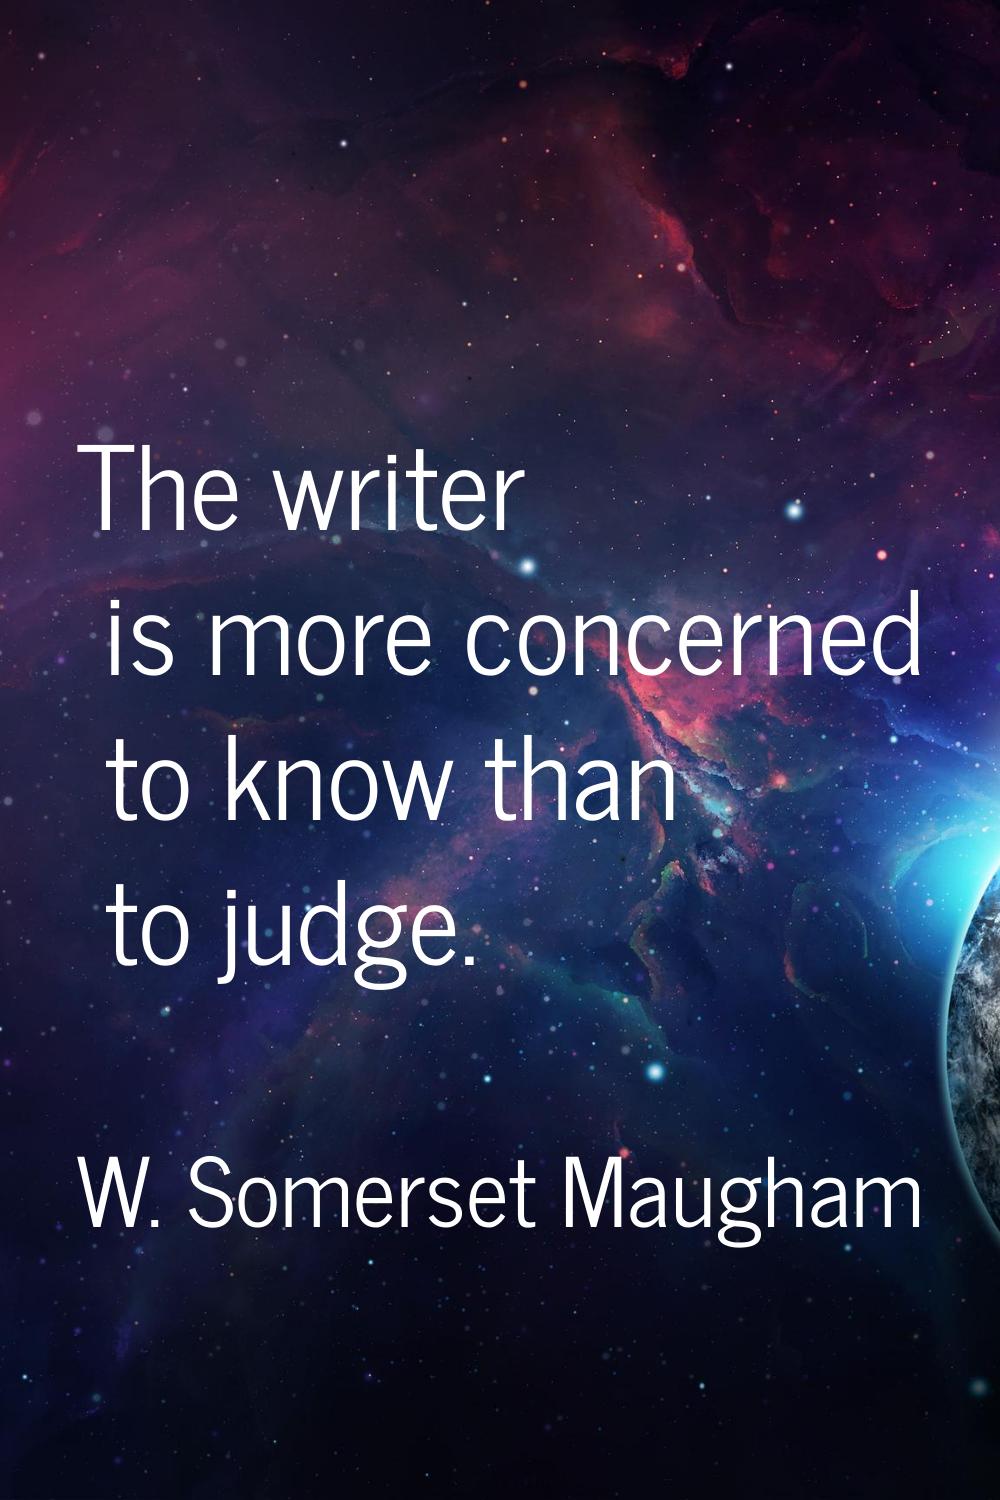 The writer is more concerned to know than to judge.